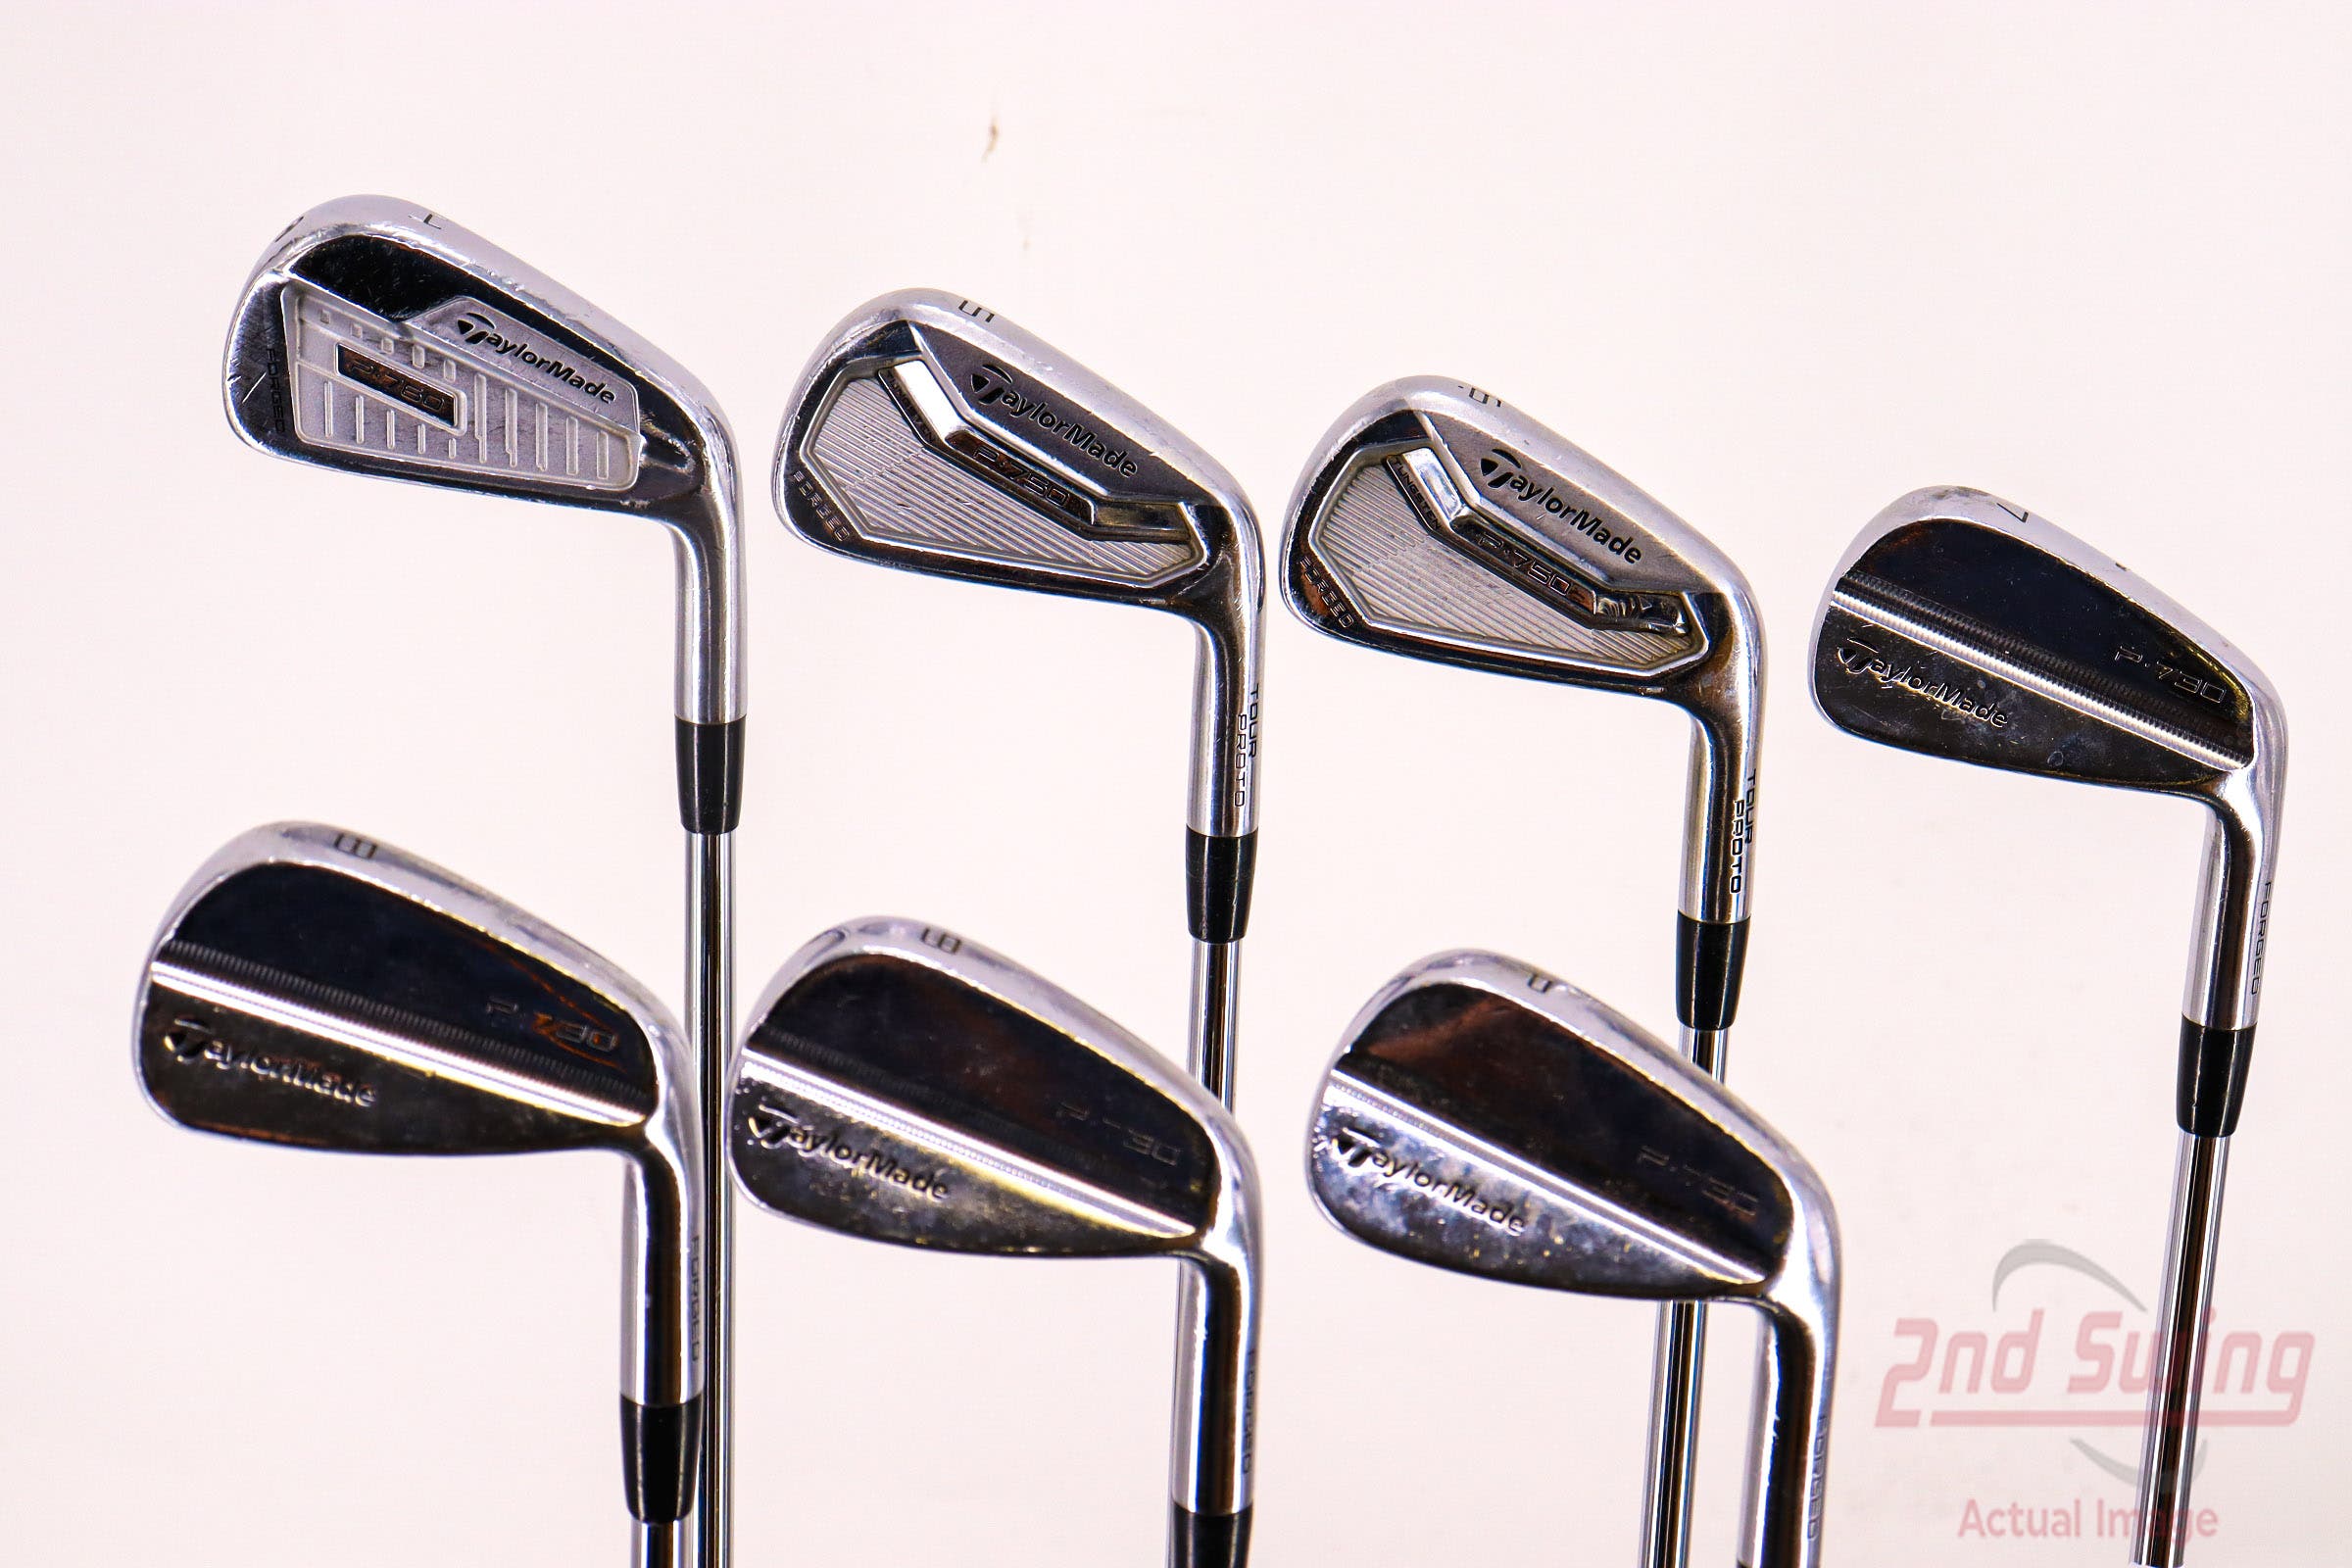 For Beginners: What are the Different Types of Golf Clubs Used for